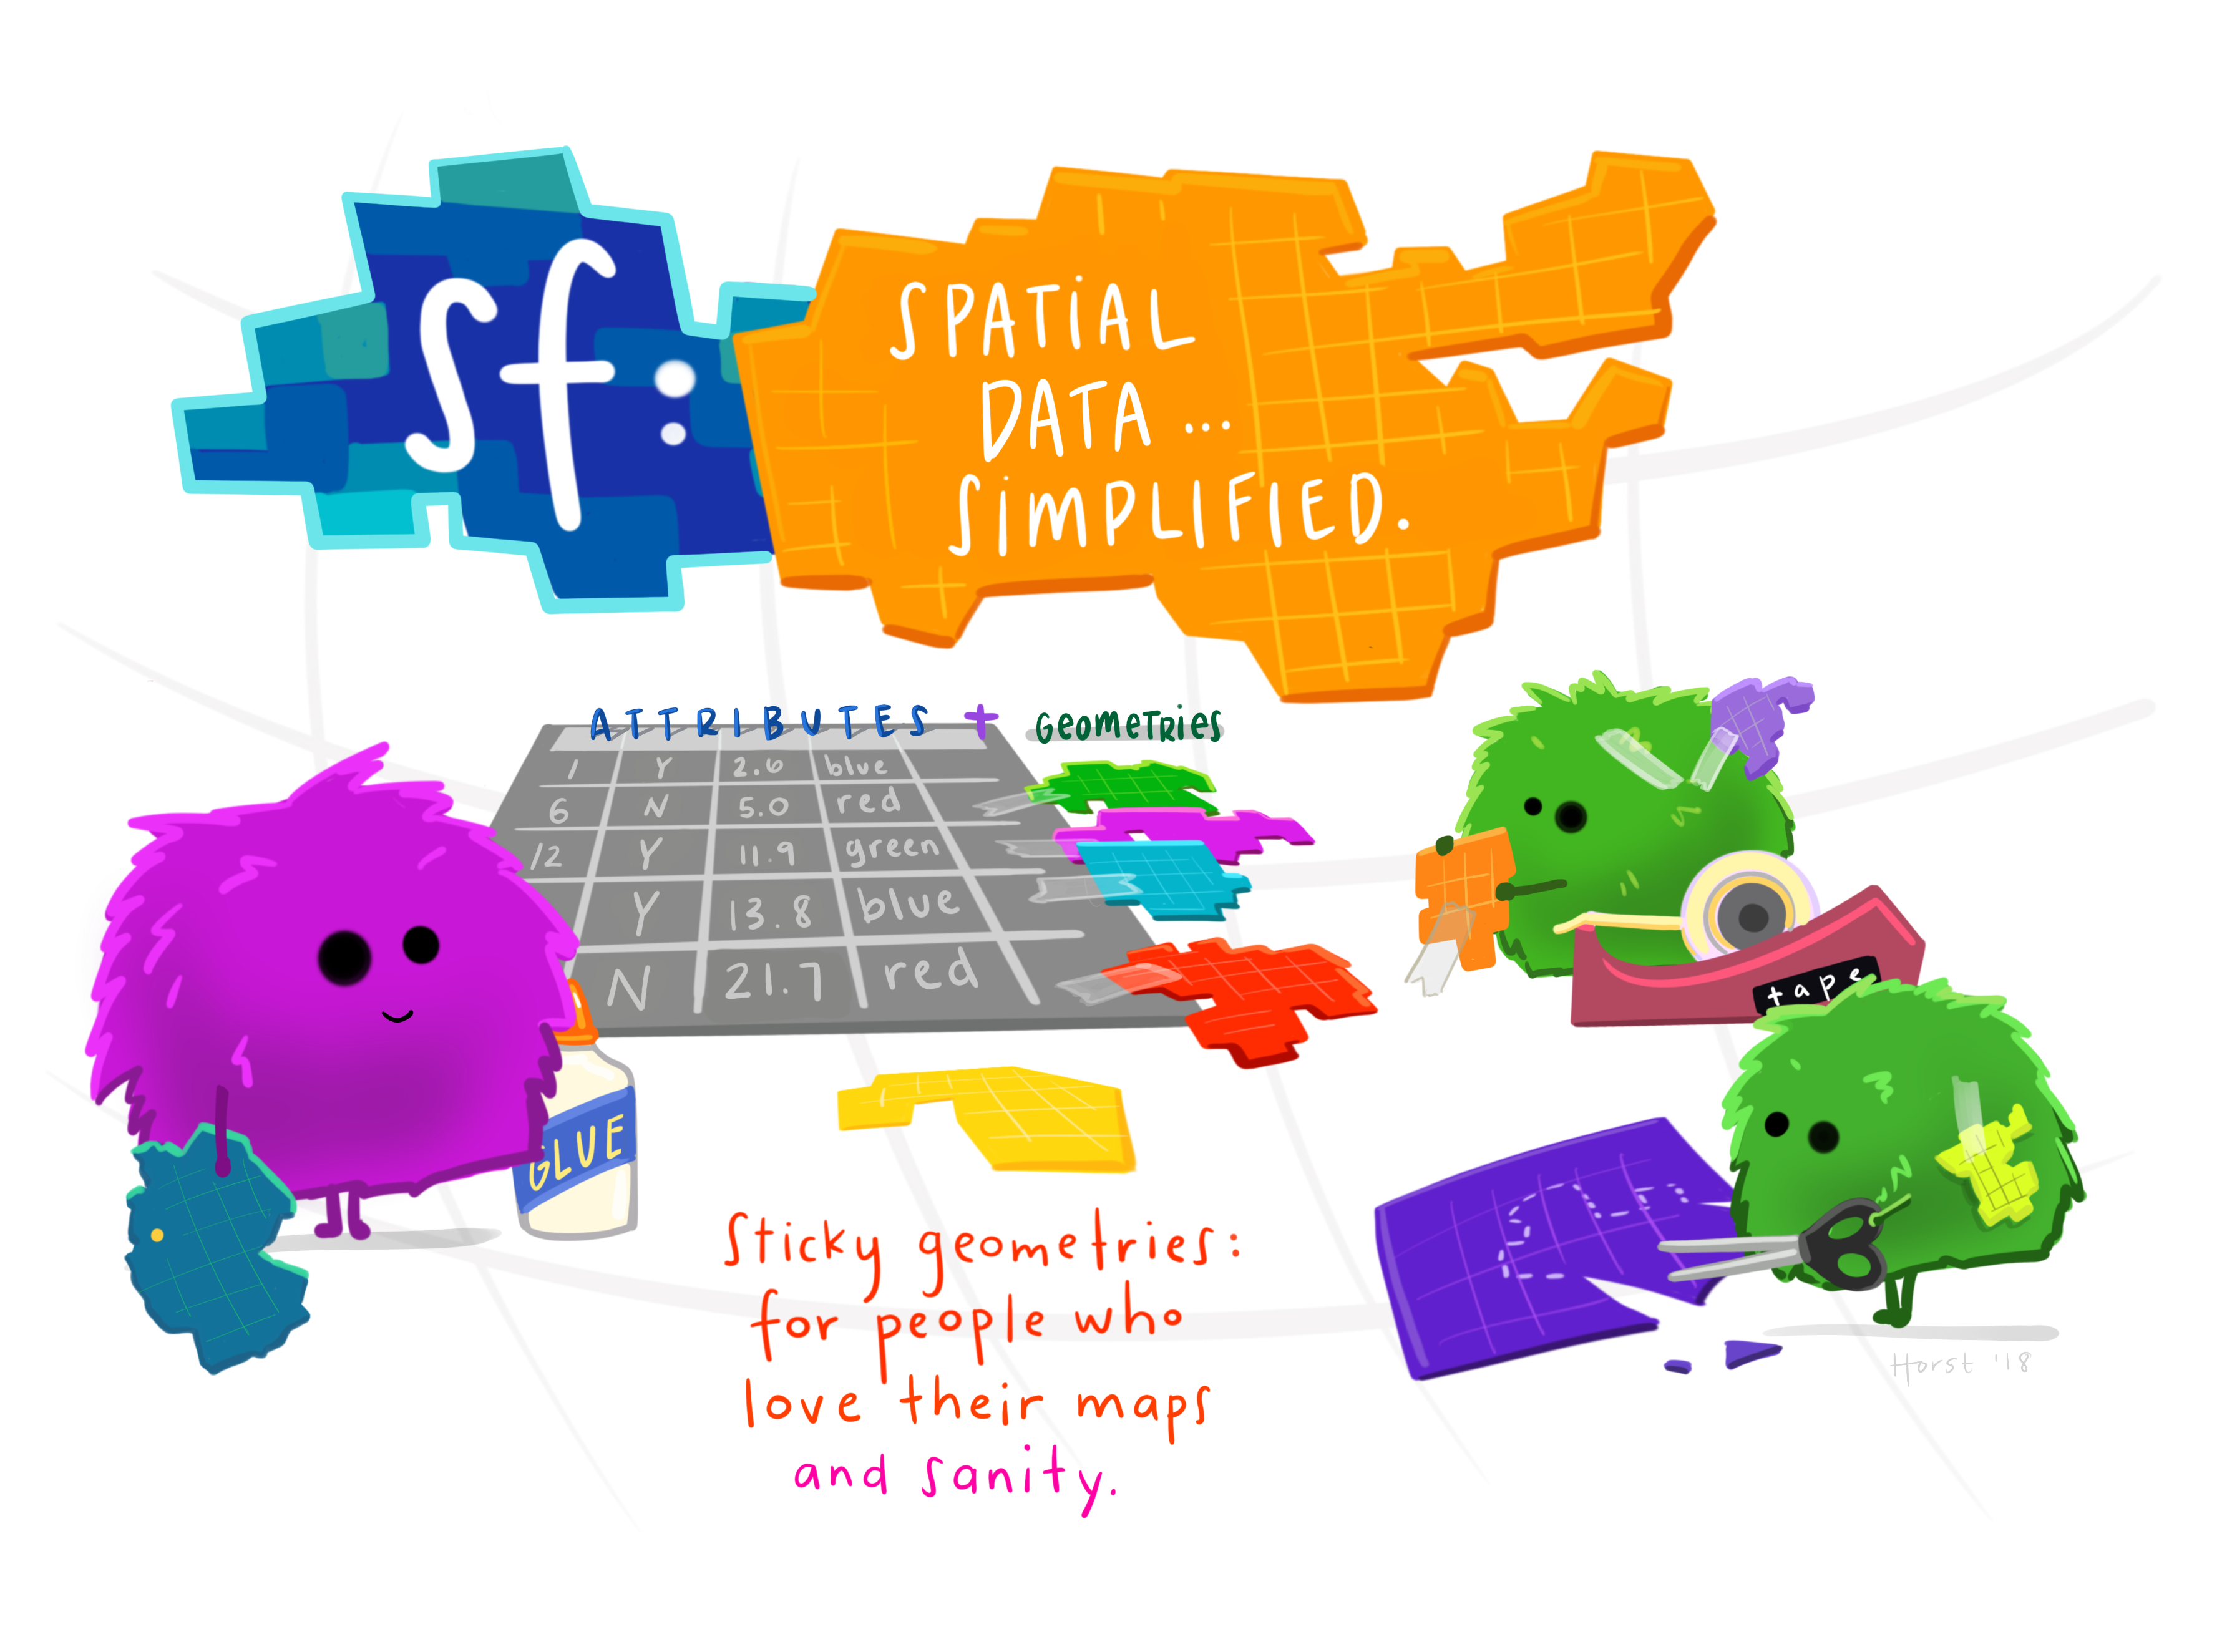 sf introduction graphic. Source: [Allison Horst data science and stats illustrations](https://github.com/allisonhorst/stats-illustrations)